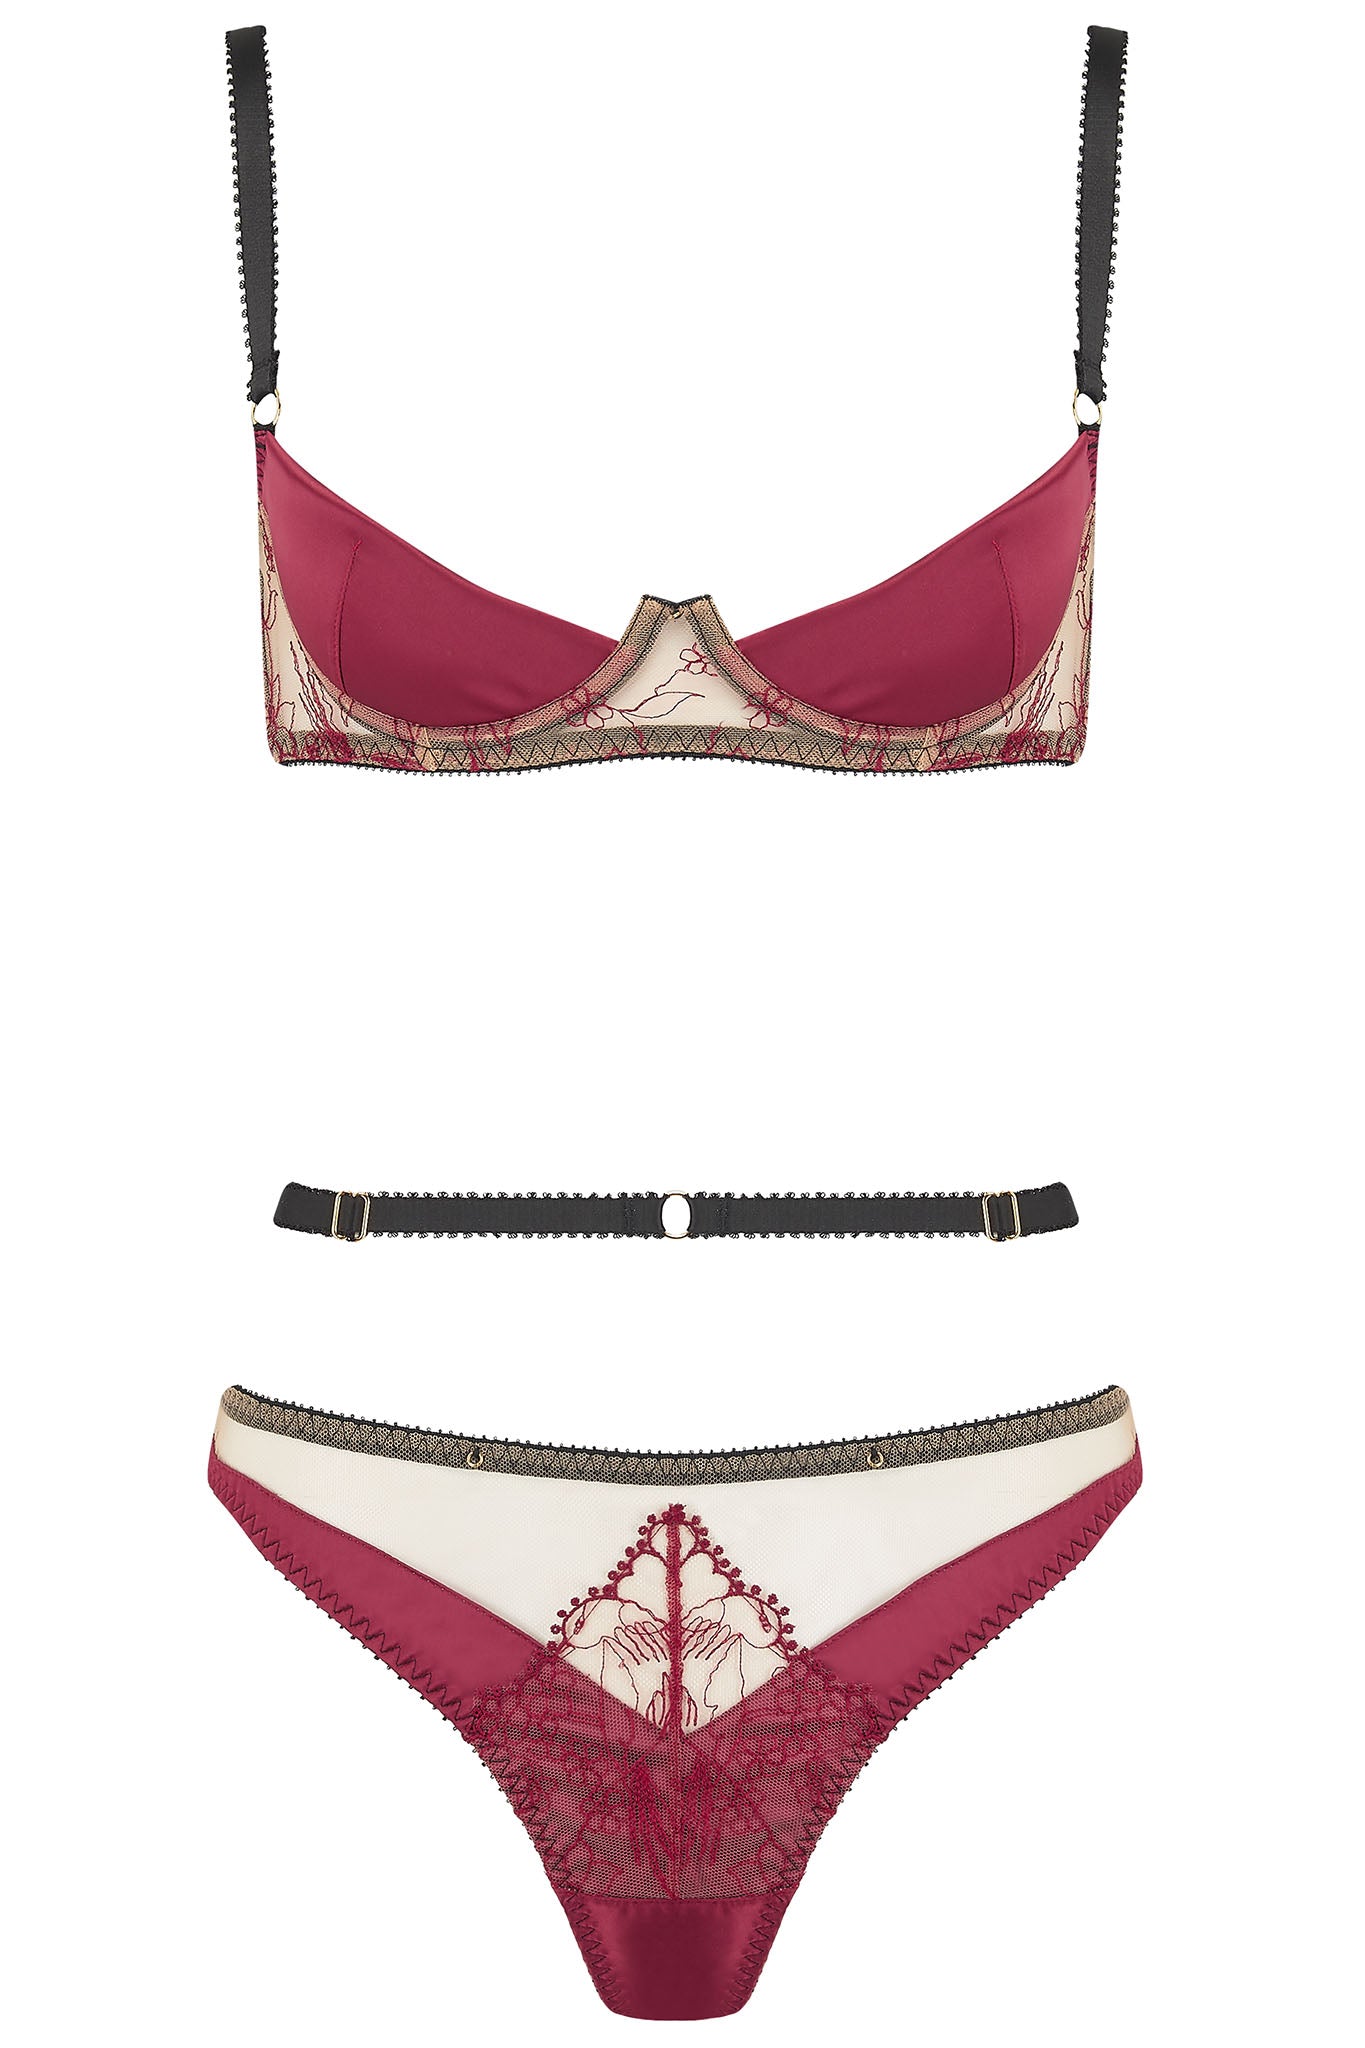 House of Skye Debuts New Bra and Lingerie Line - Maxim